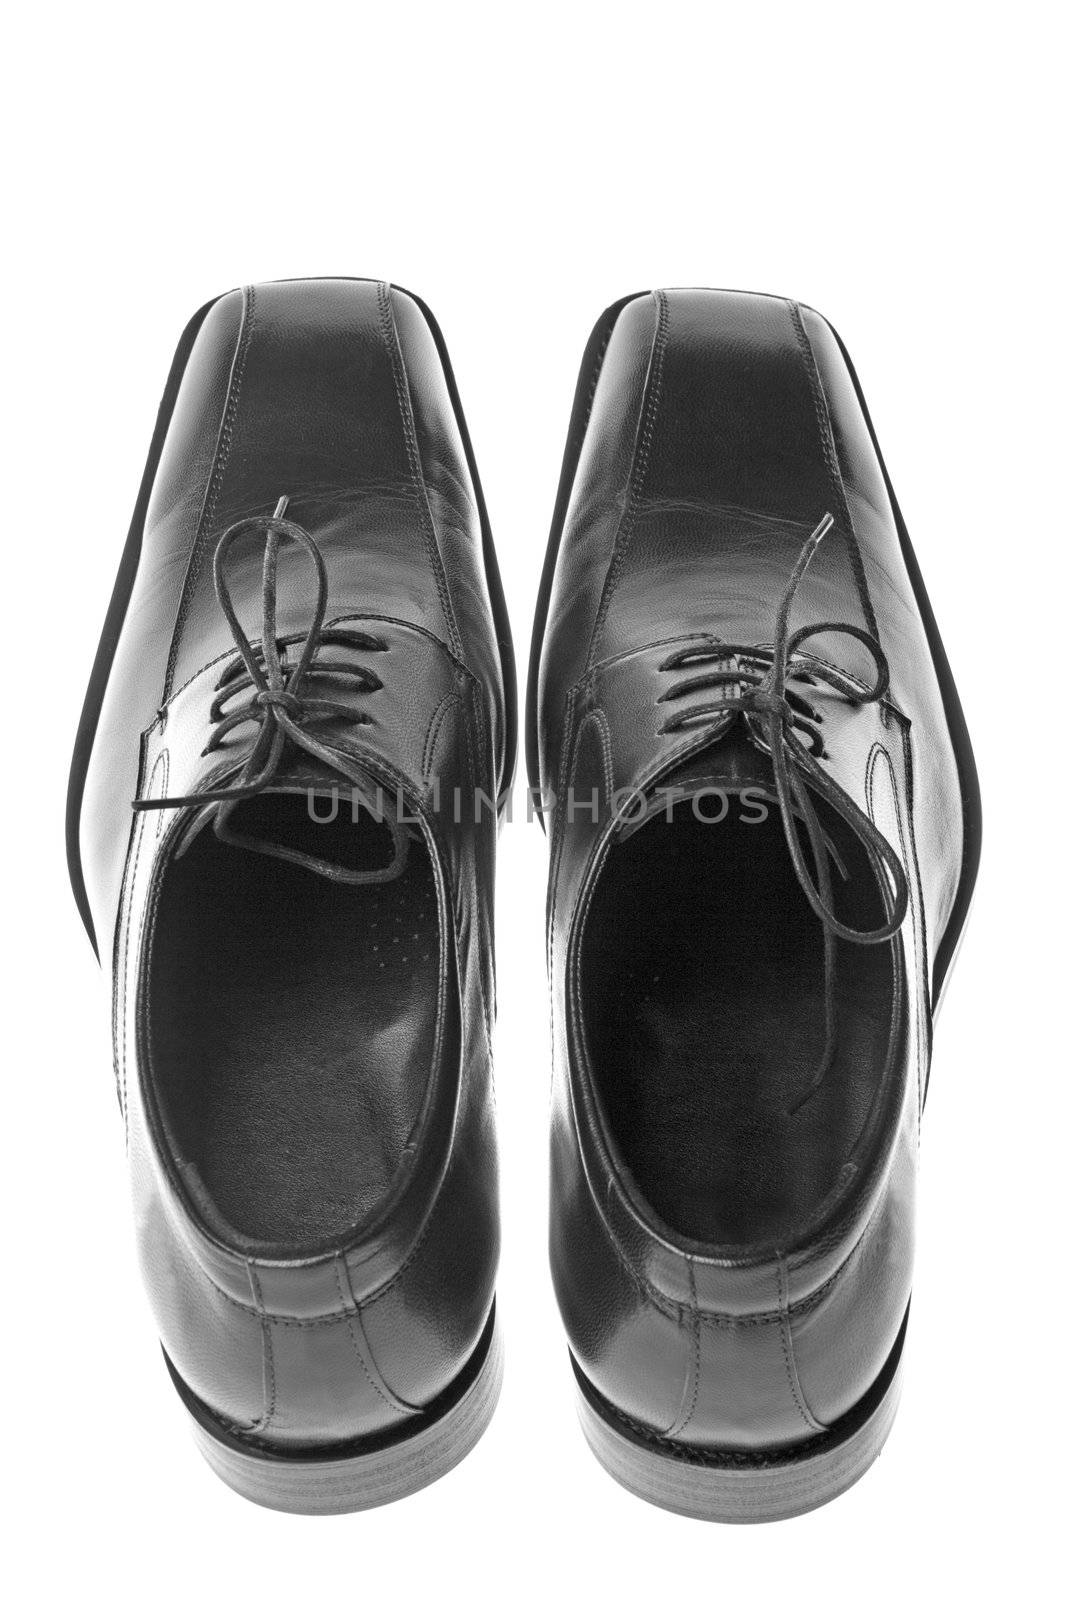 Men's Black Shoes by shariffc